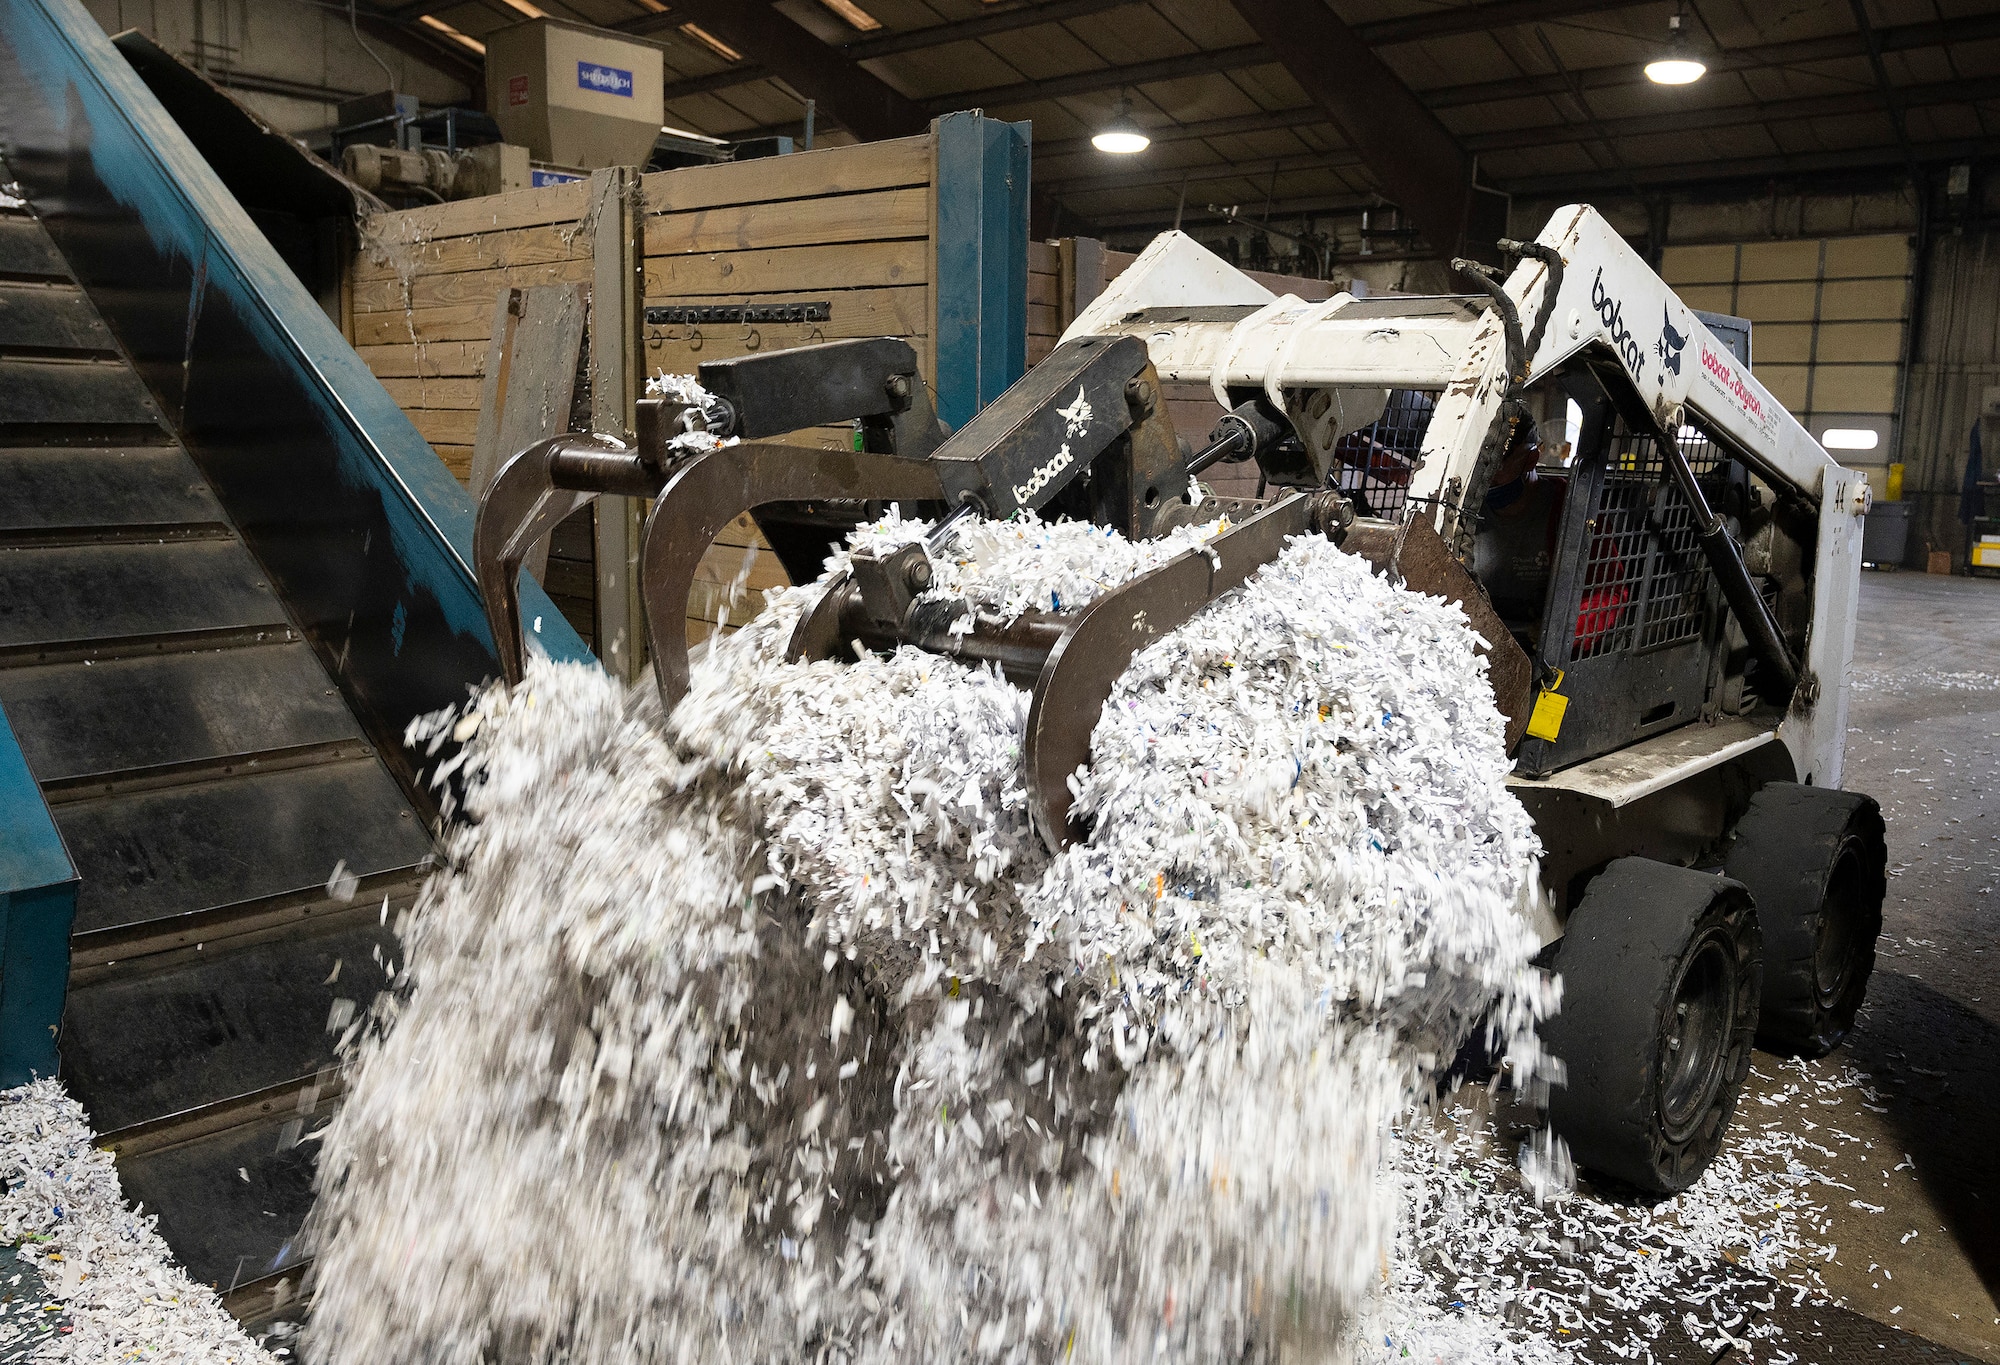 A load of shredded paper is dumped on a conveyor belt that feeds into the baler Sept. 22, 2021, inside the Recycling Center at Wright-Patterson Air Force Base, Ohio. Paper and cardboard are sorted before being formed into bales that weigh approximately a ton. (U.S. Air Force photo by R.J. Oriez)